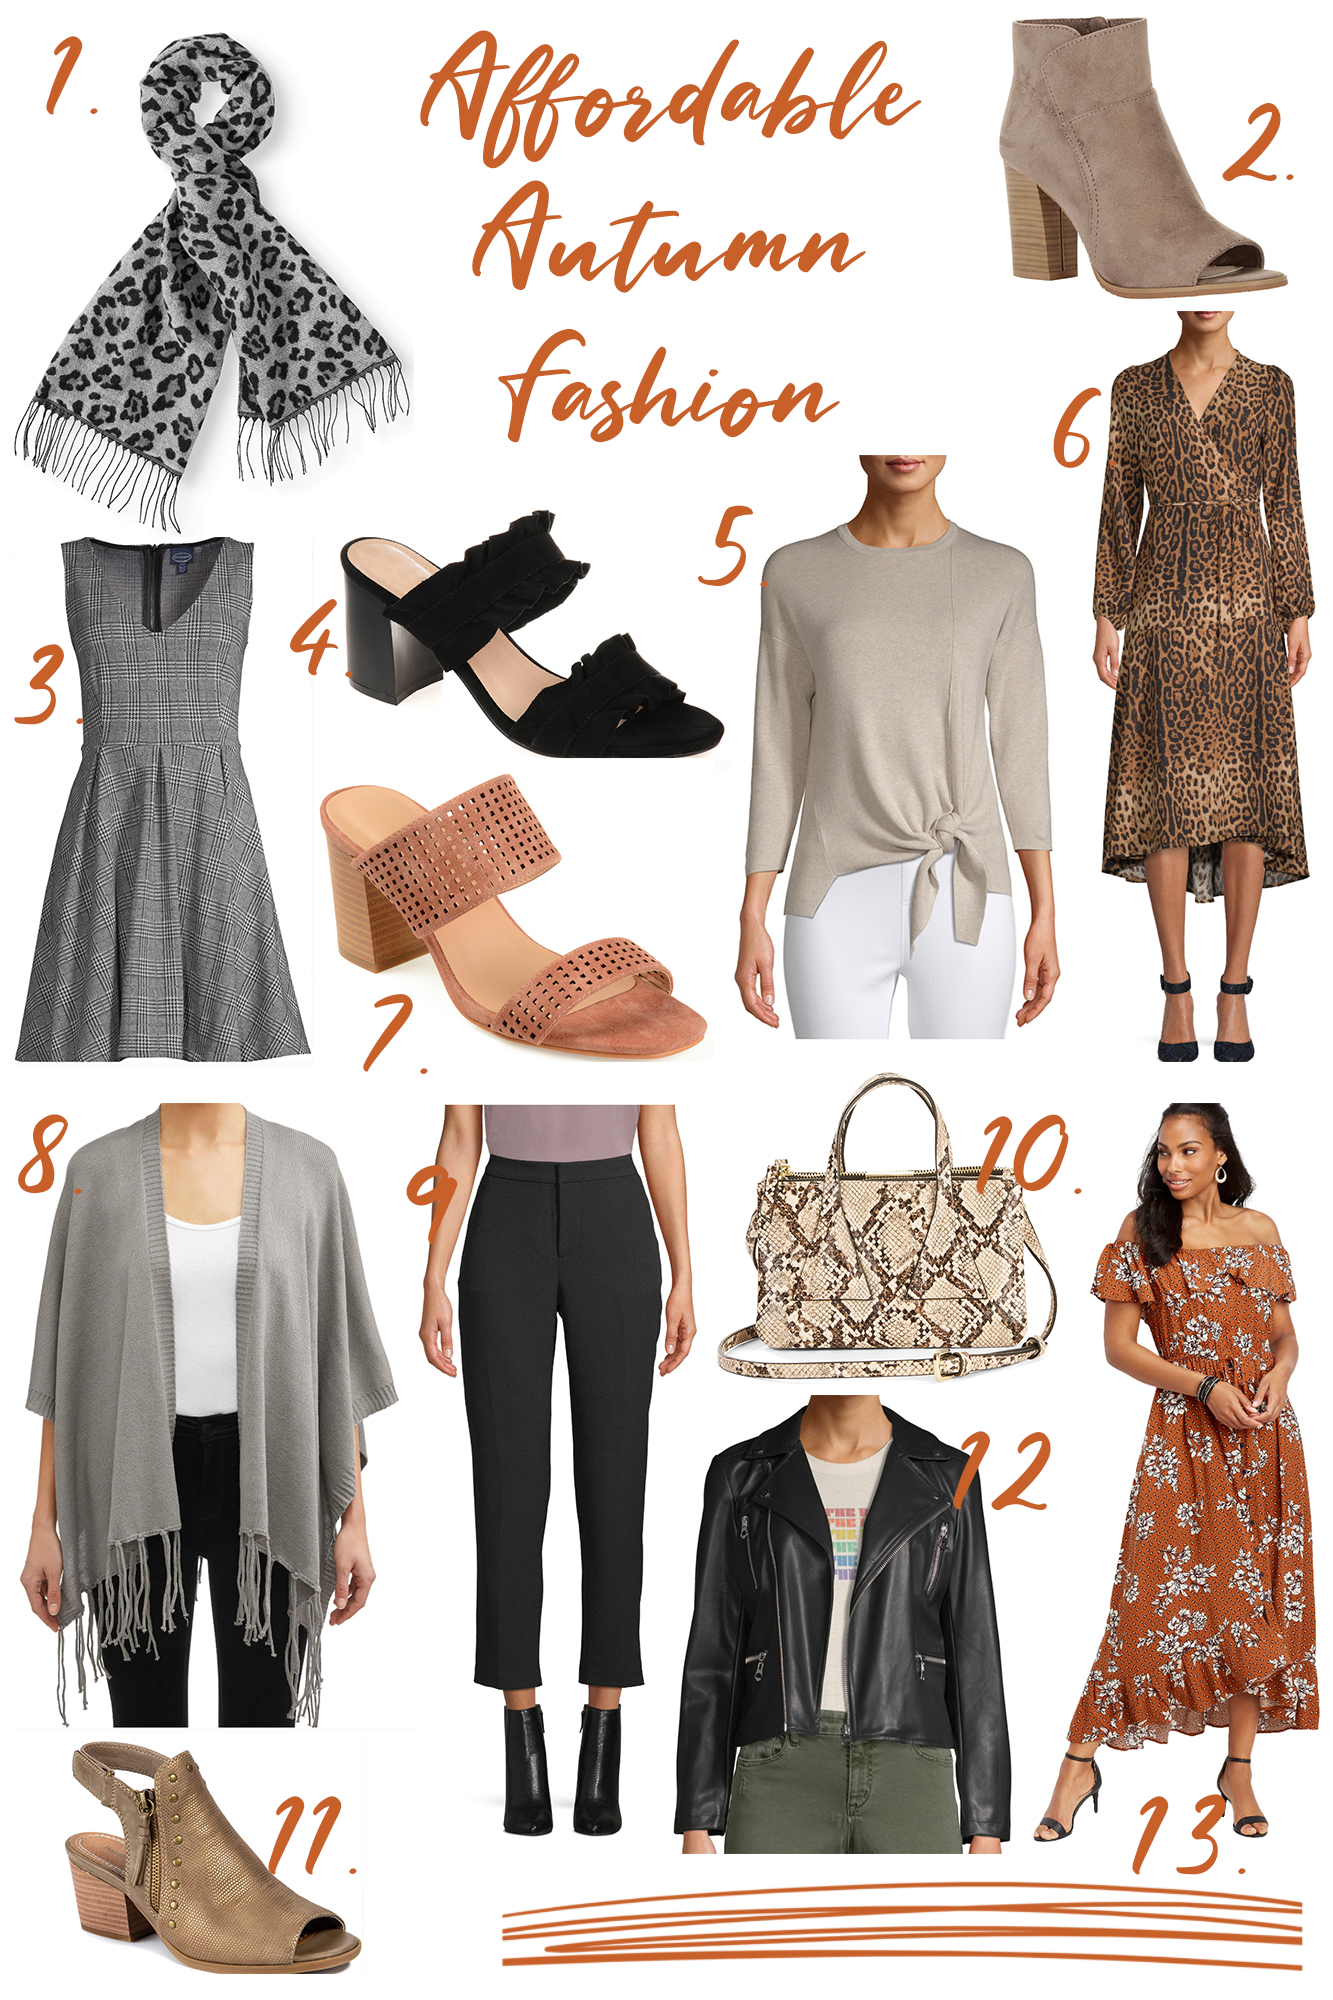 Fall To-Do List & Affordable Autumn Fashion - Harvest time is one of my favorite seasons.. I rounded up the best Fall activities & clothing options for you!